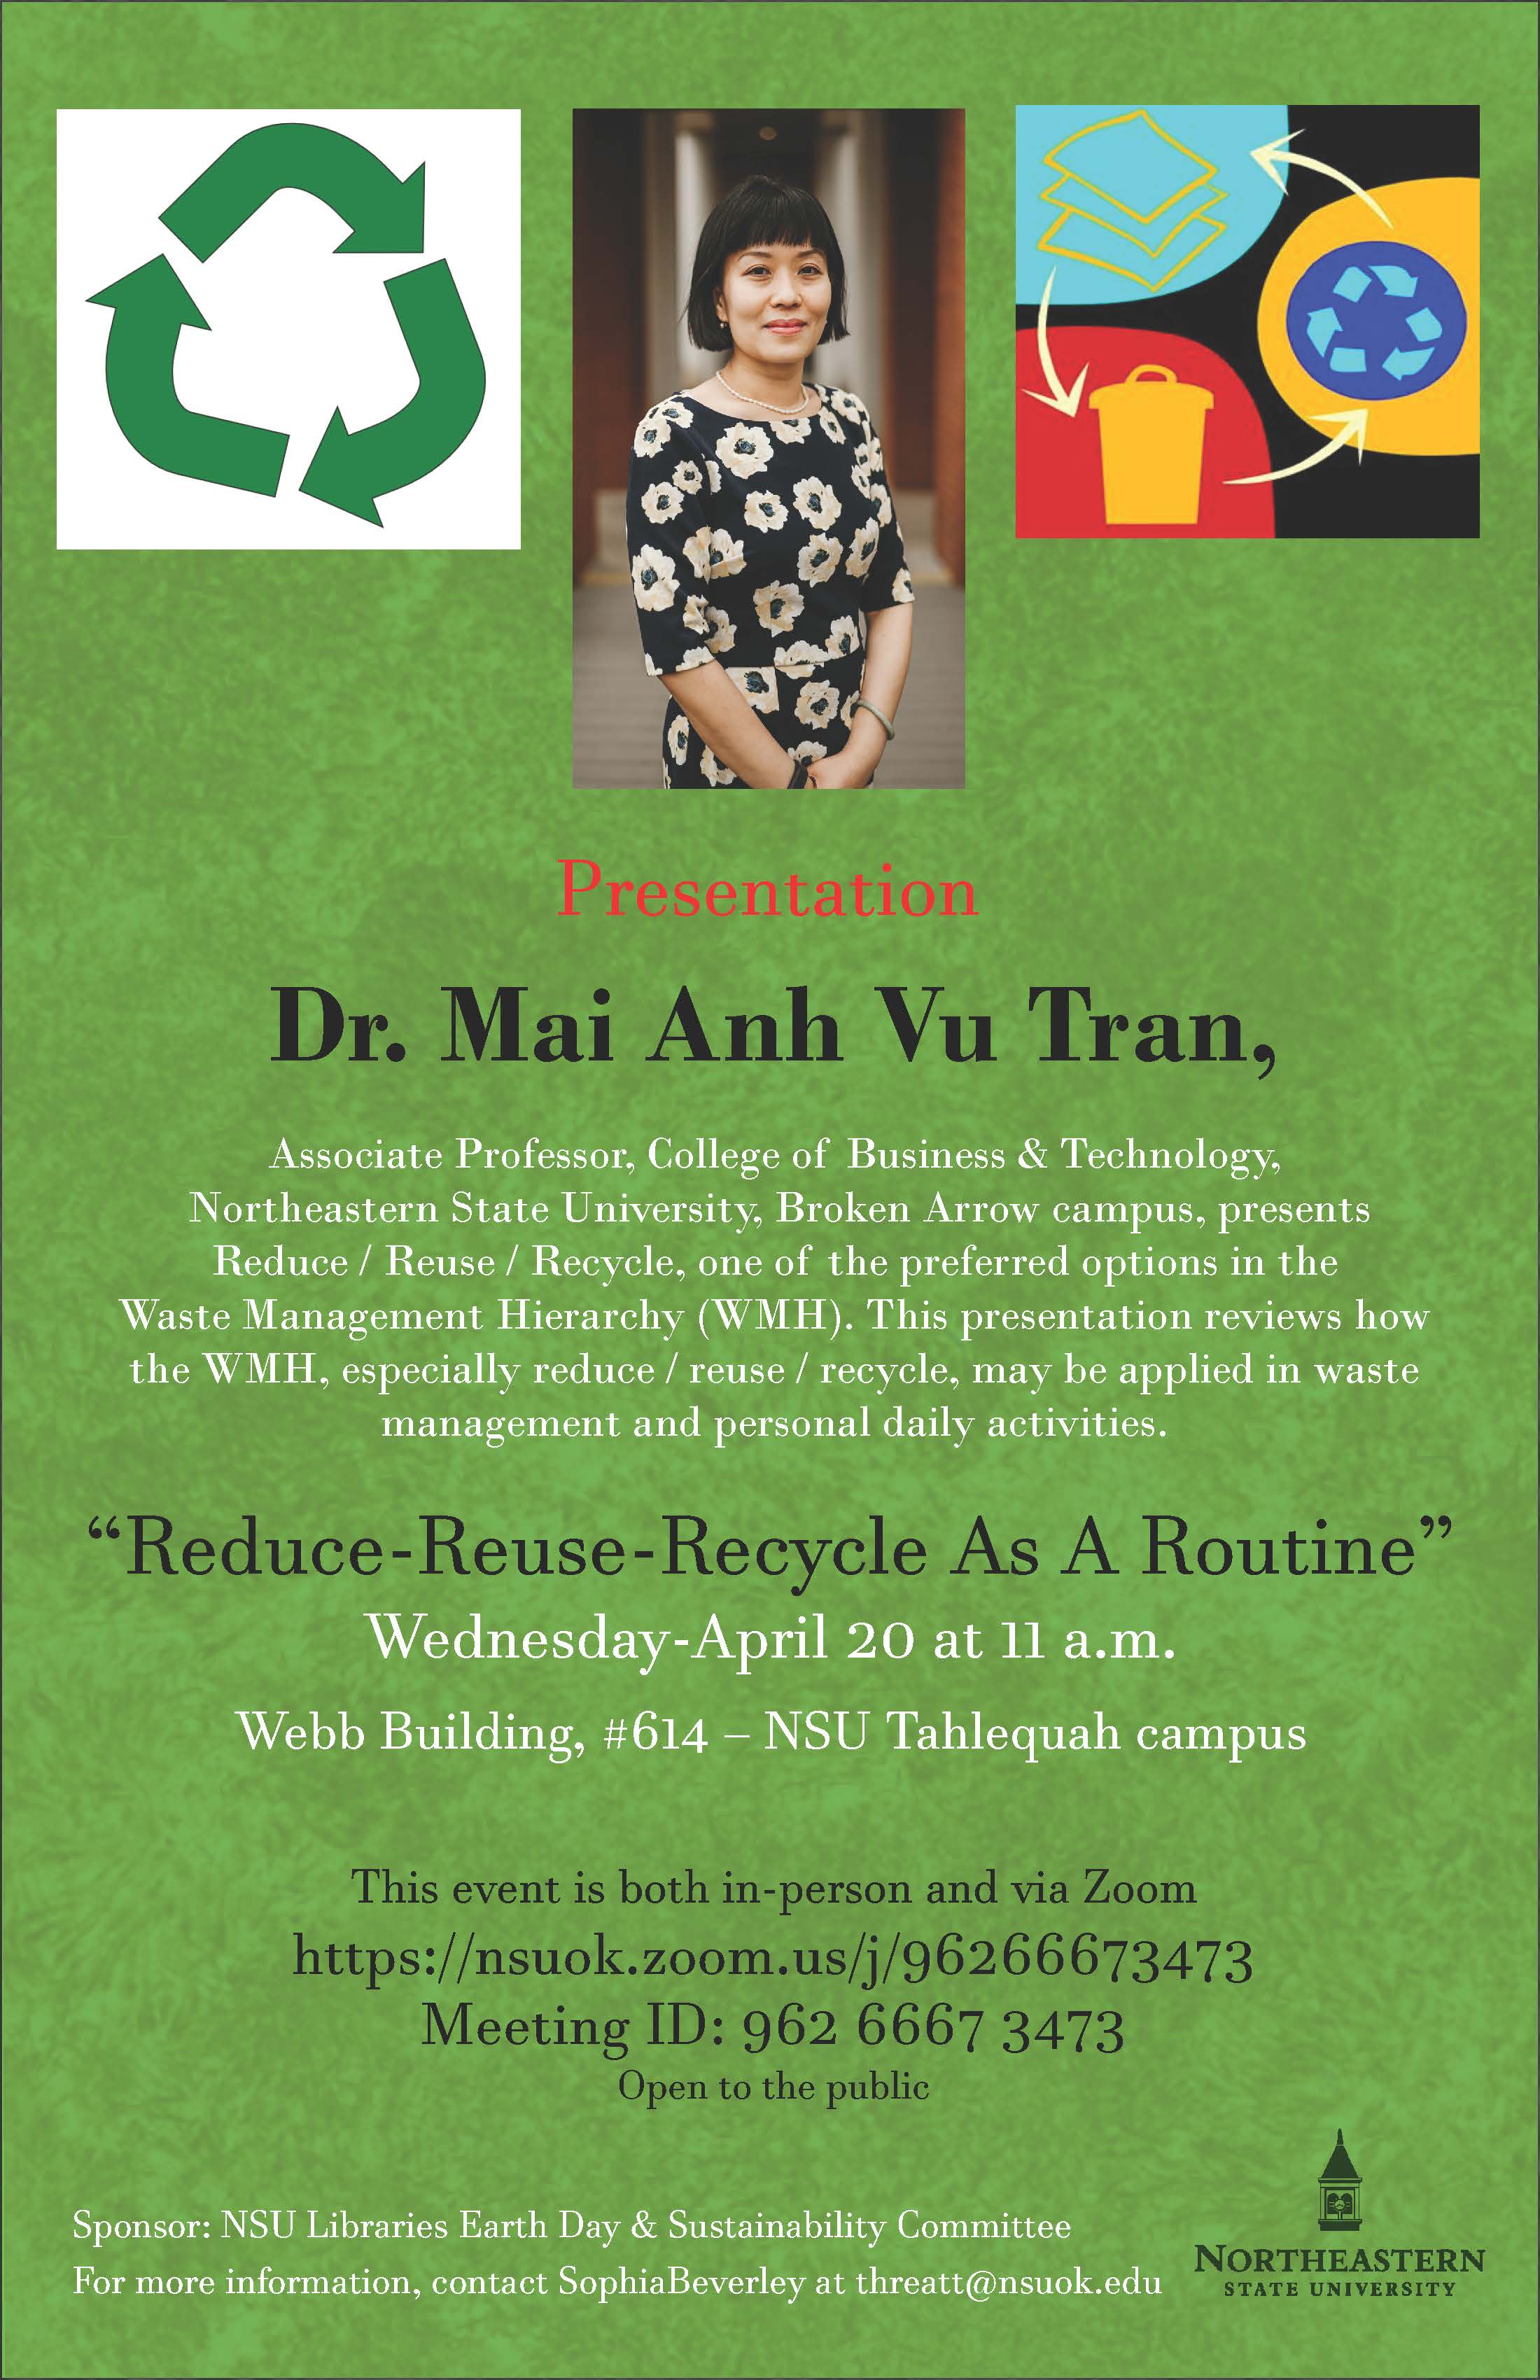 Dr. Mai Anh Van Tran presents “Reduce-Reuse-Recycle as a Routine”